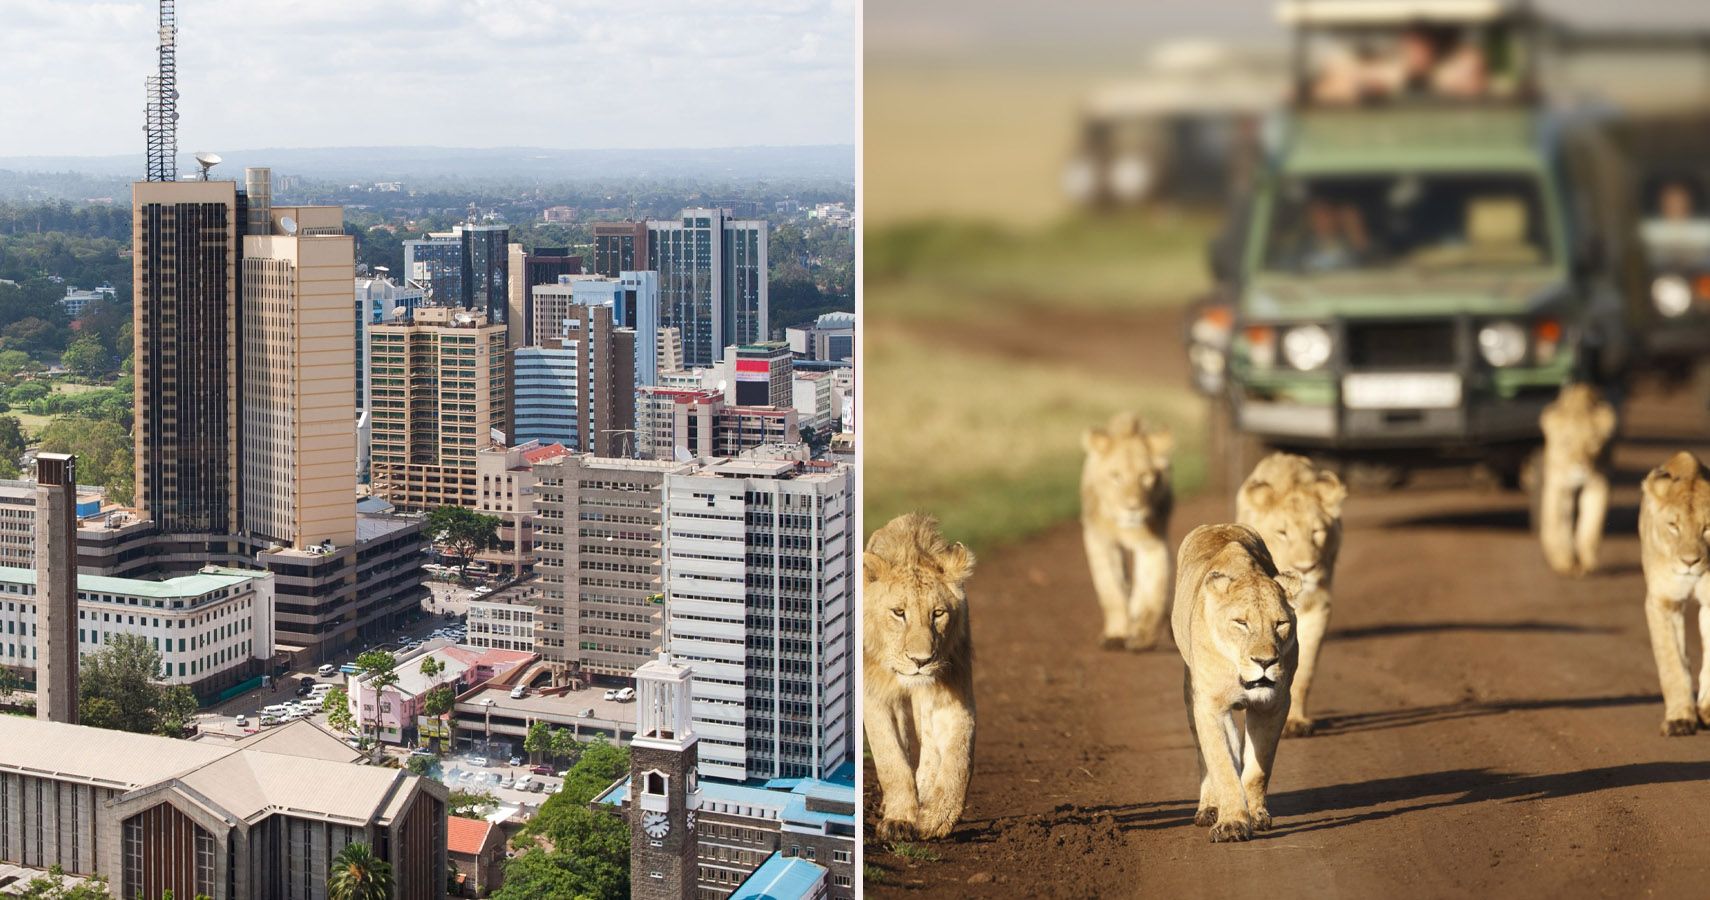 What You Need To Know Before Travelling To Kenya